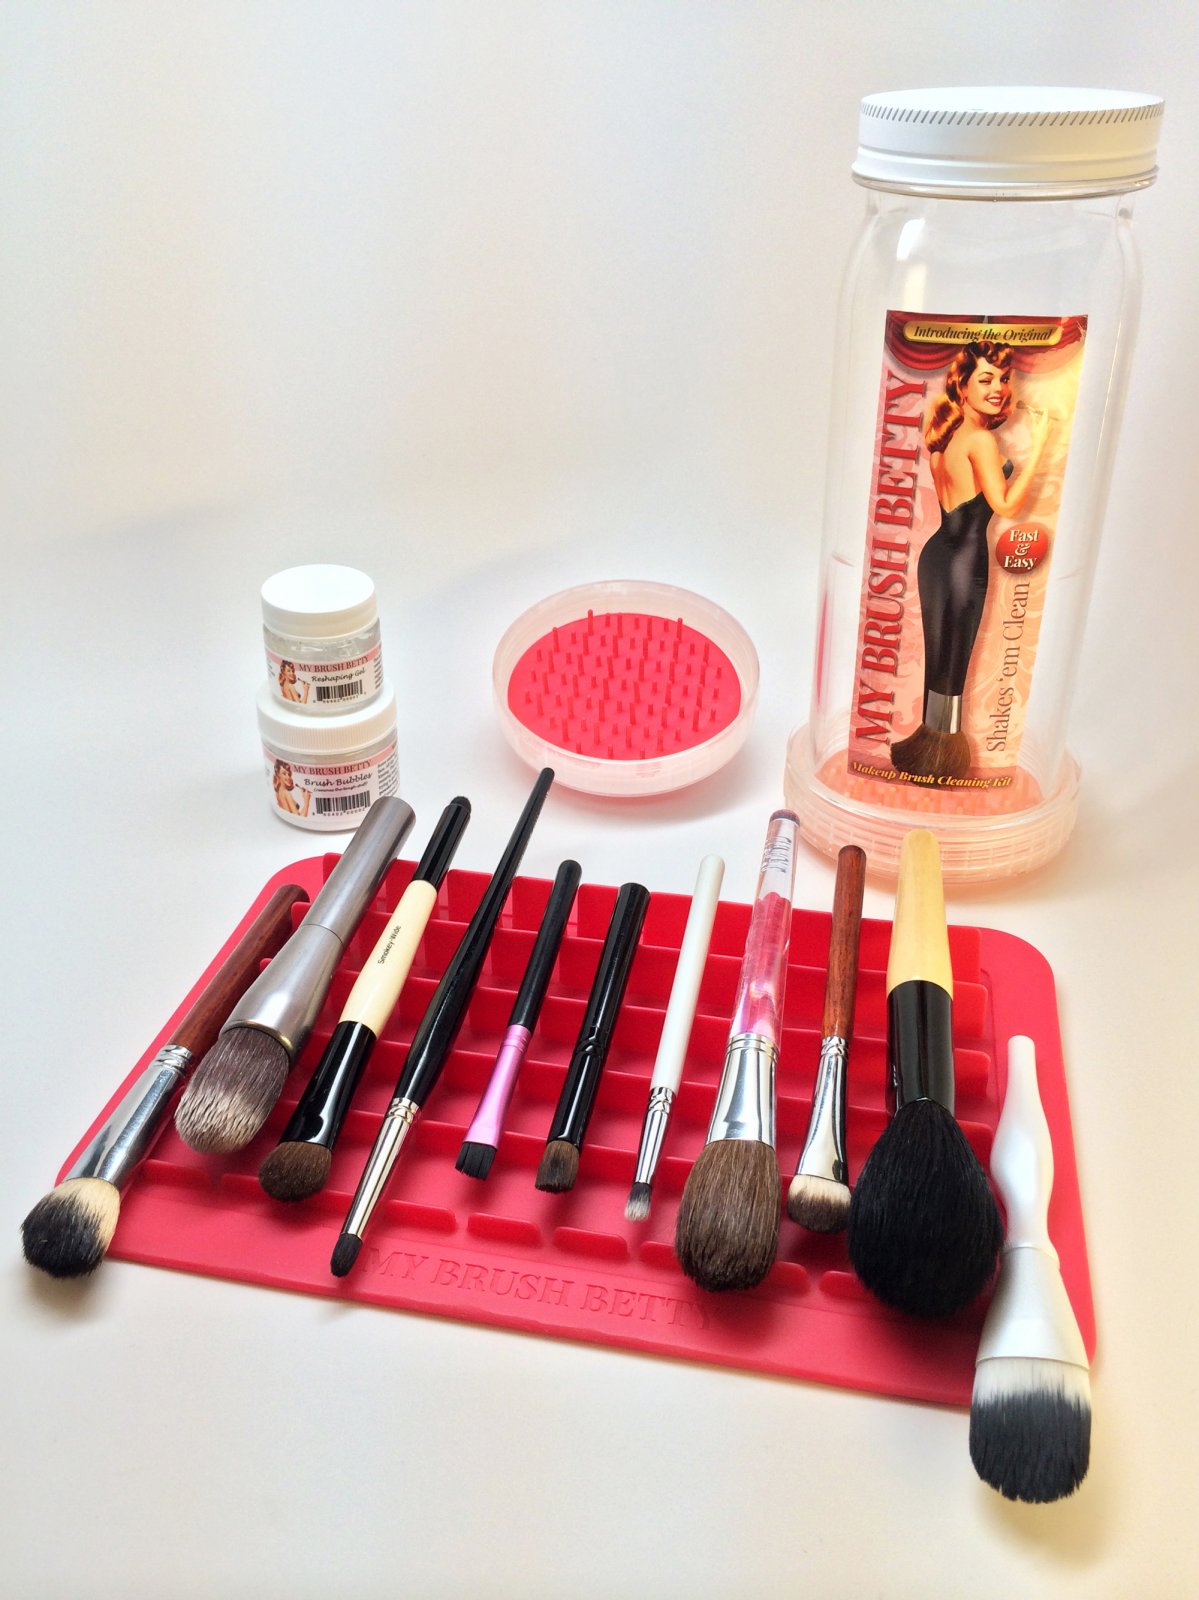 ($23 Value) e.l.f. Candy Cane 7 Piece Holiday Makeup Brush Set, Face & Eye